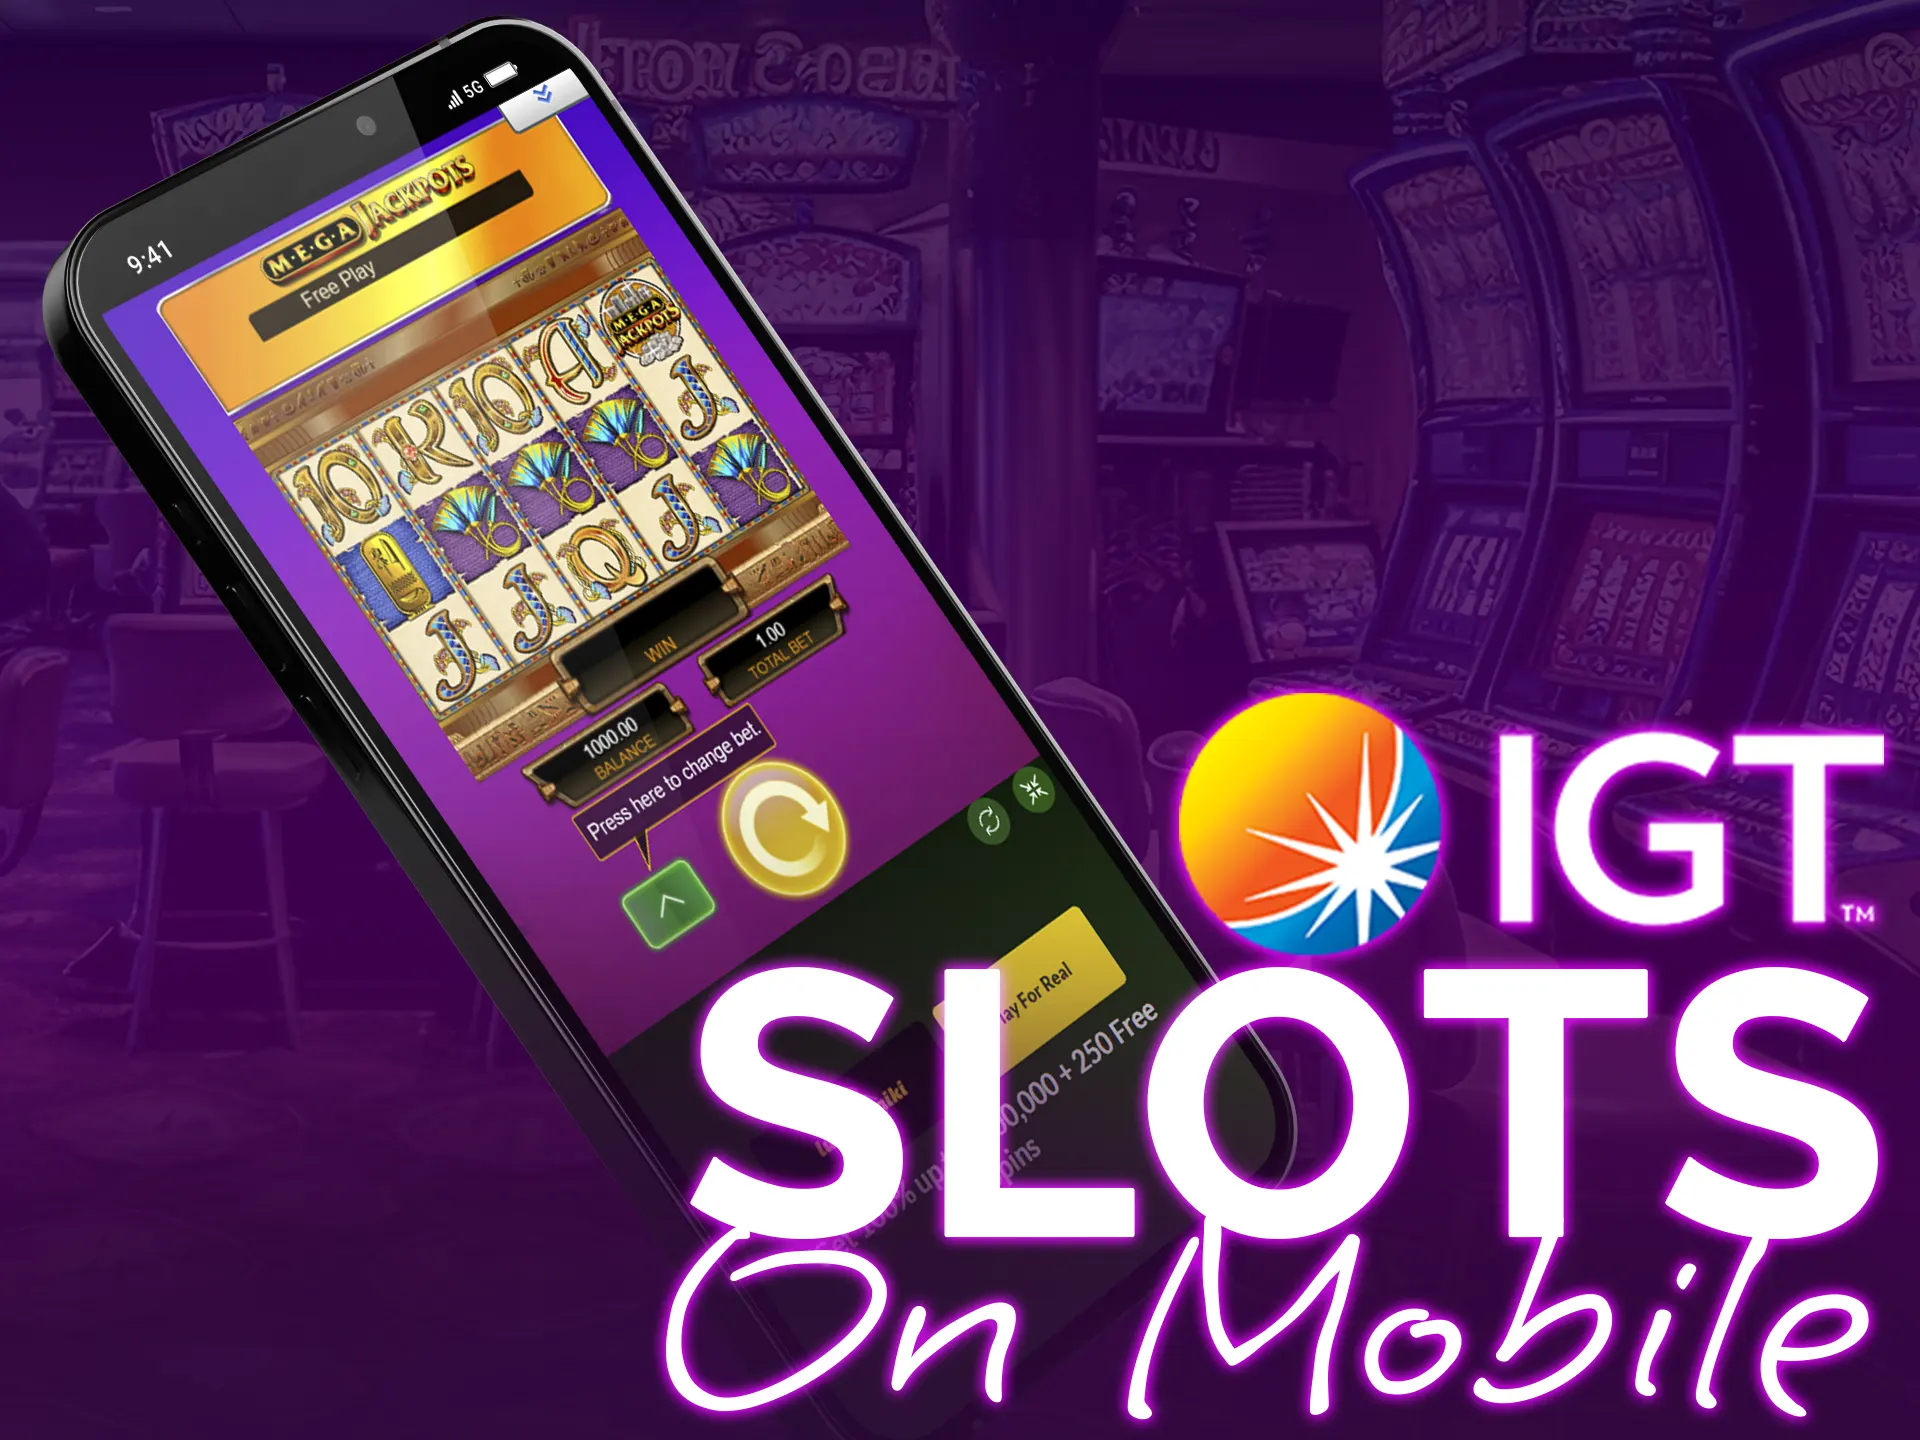 Take the opportunity to play IGT slots from mobile devices.